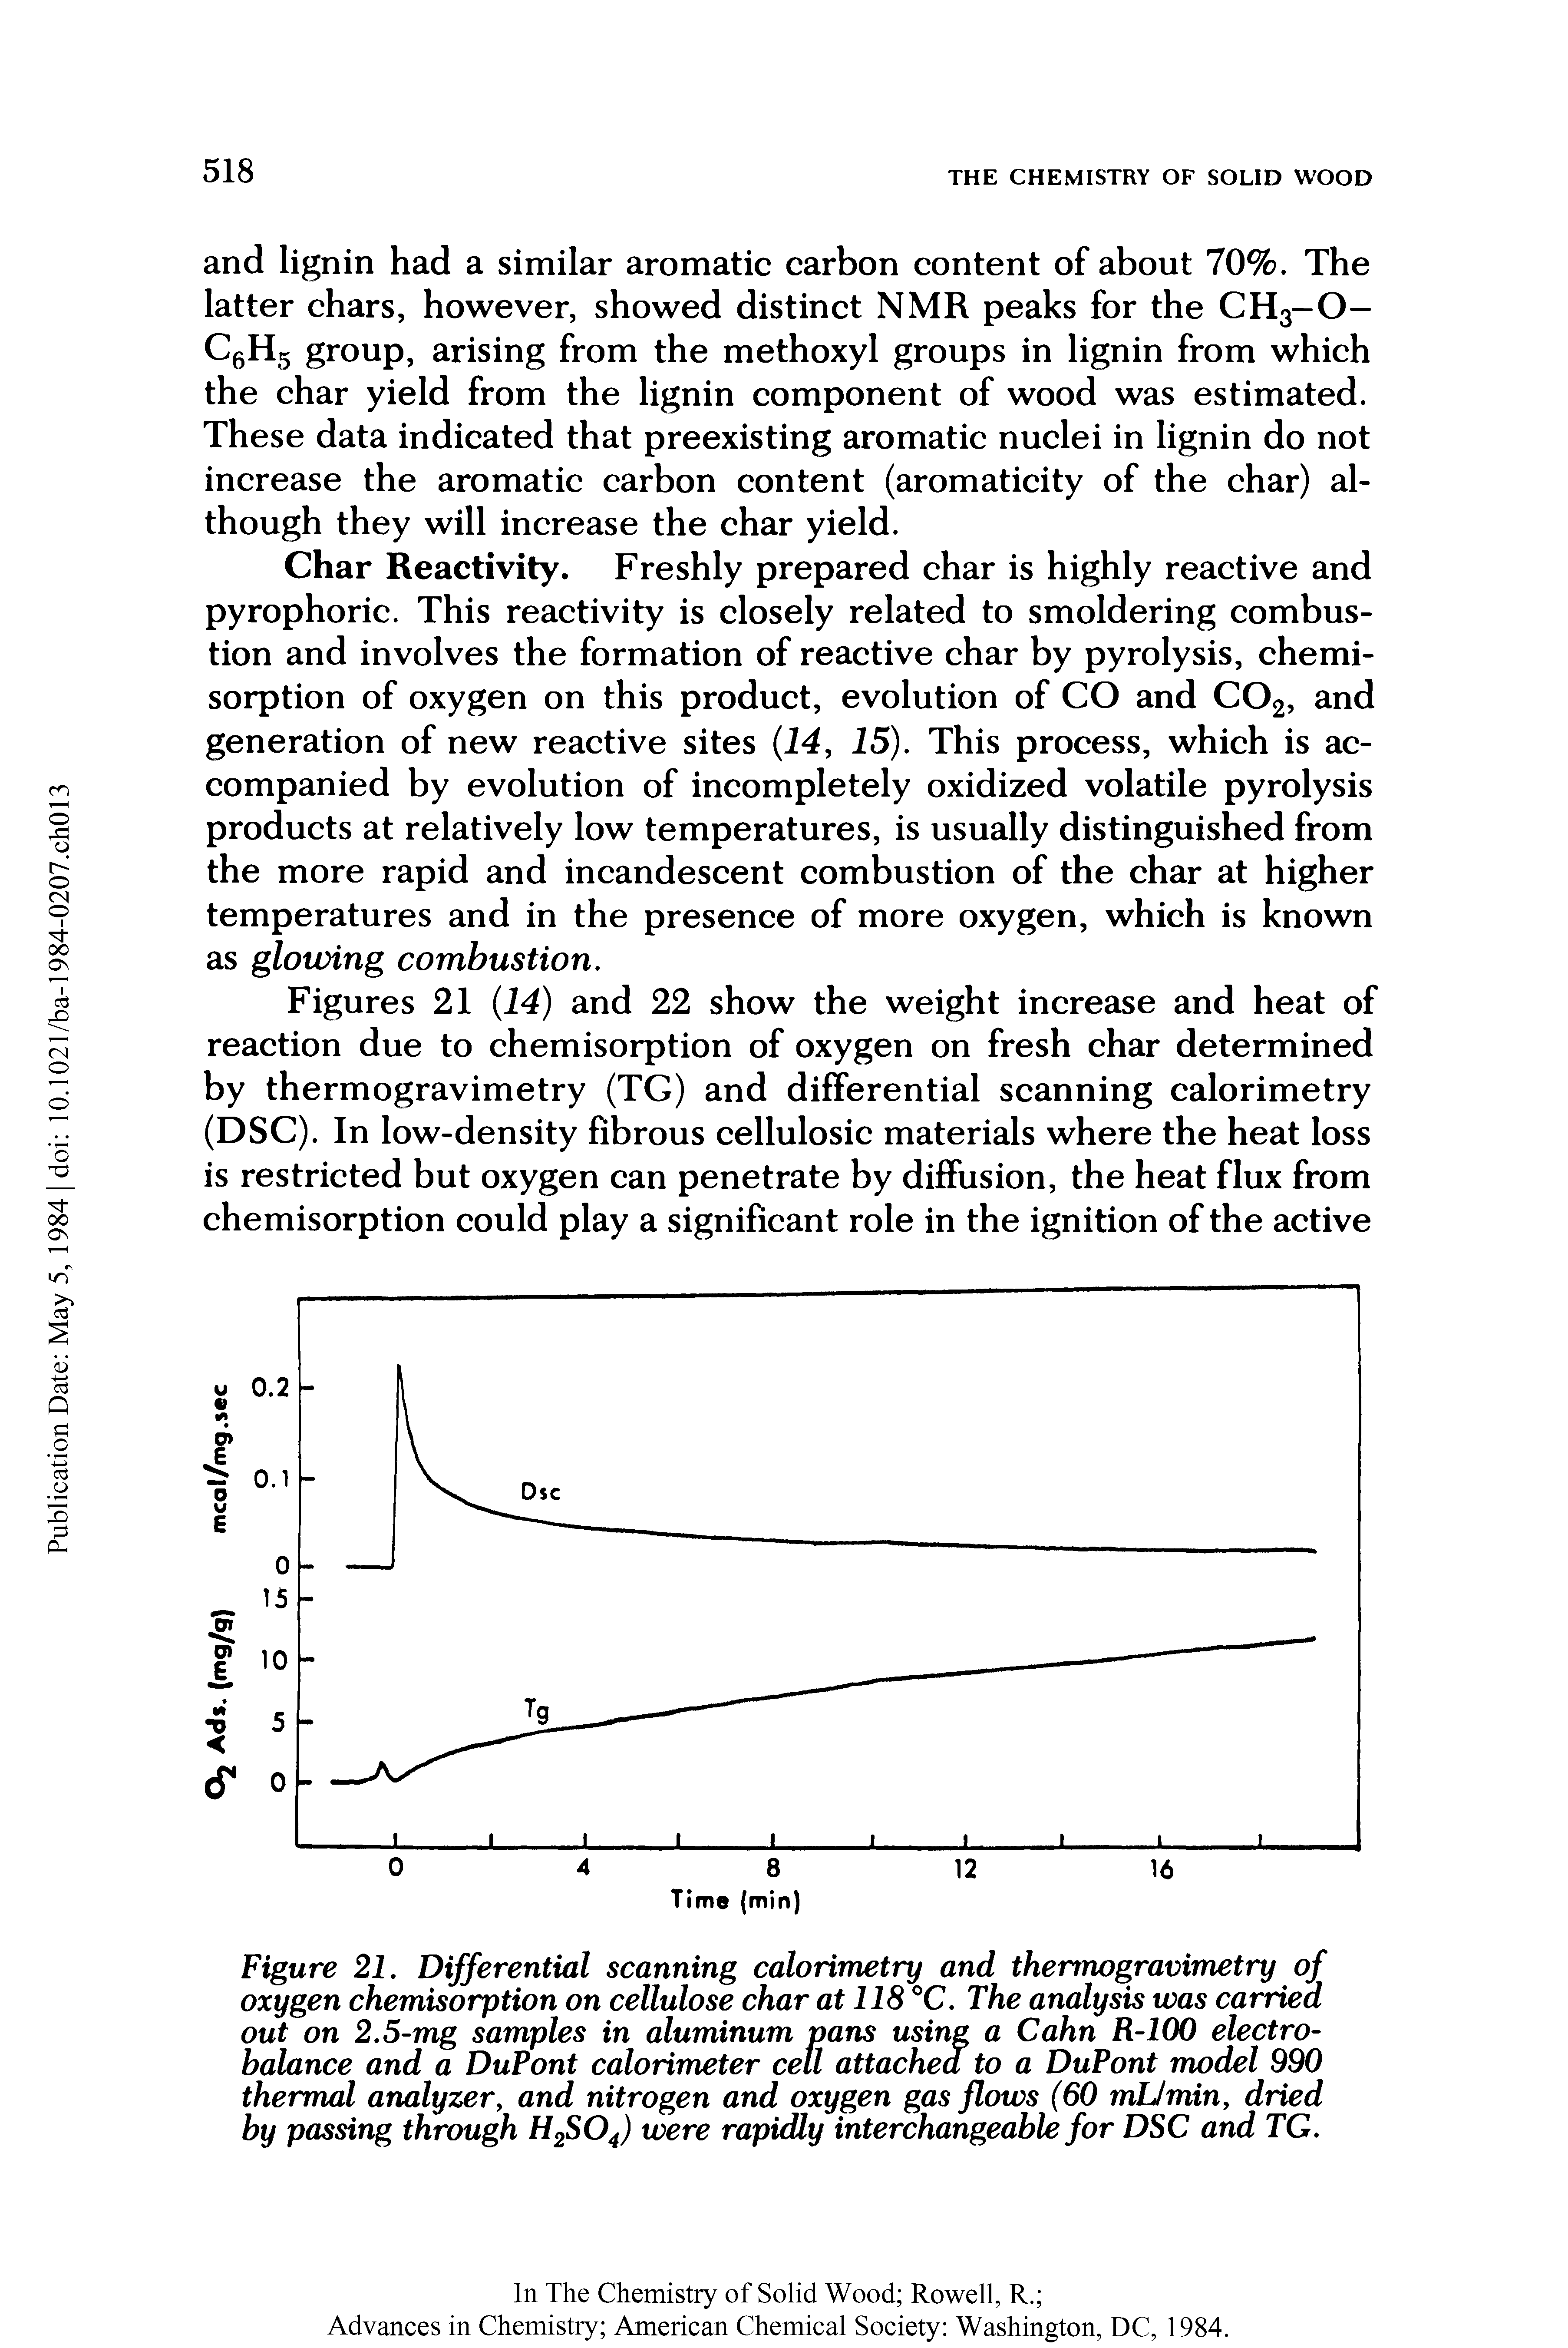 Figure 21. Differential scanning calorimetry and thermogravimetry of oxygen chemisorption on cellulose char at 118 C. The analysis was carried out on 2.5-mg samples in aluminum pans using a Cohn R-lOO electrobalance and a DuPont calorimeter cell attached to a DuPont model 990 thermal analyzer, and nitrogen and oxygen gas flows (60 mL/min, dried by passing through H2SO4) were rapidly interchangeable for DSC and TG.